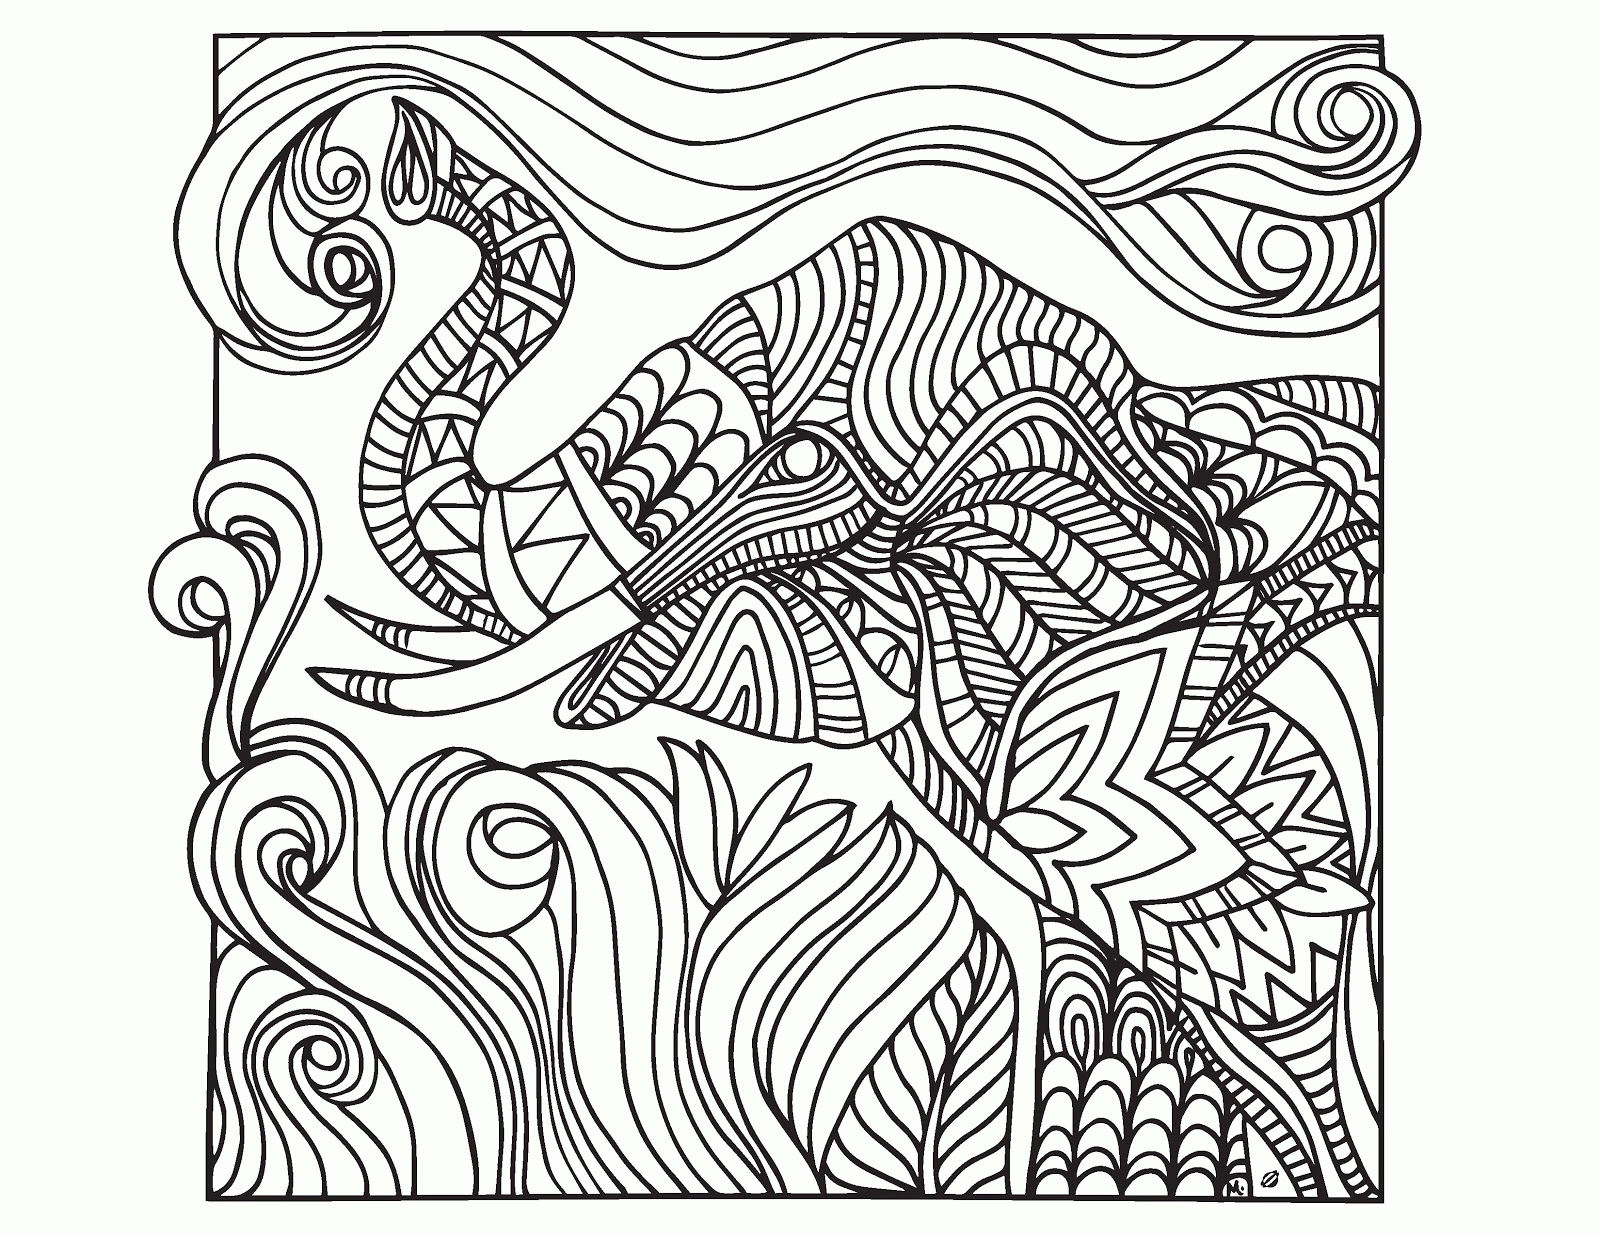 Relaxation Coloring Page - Elephant